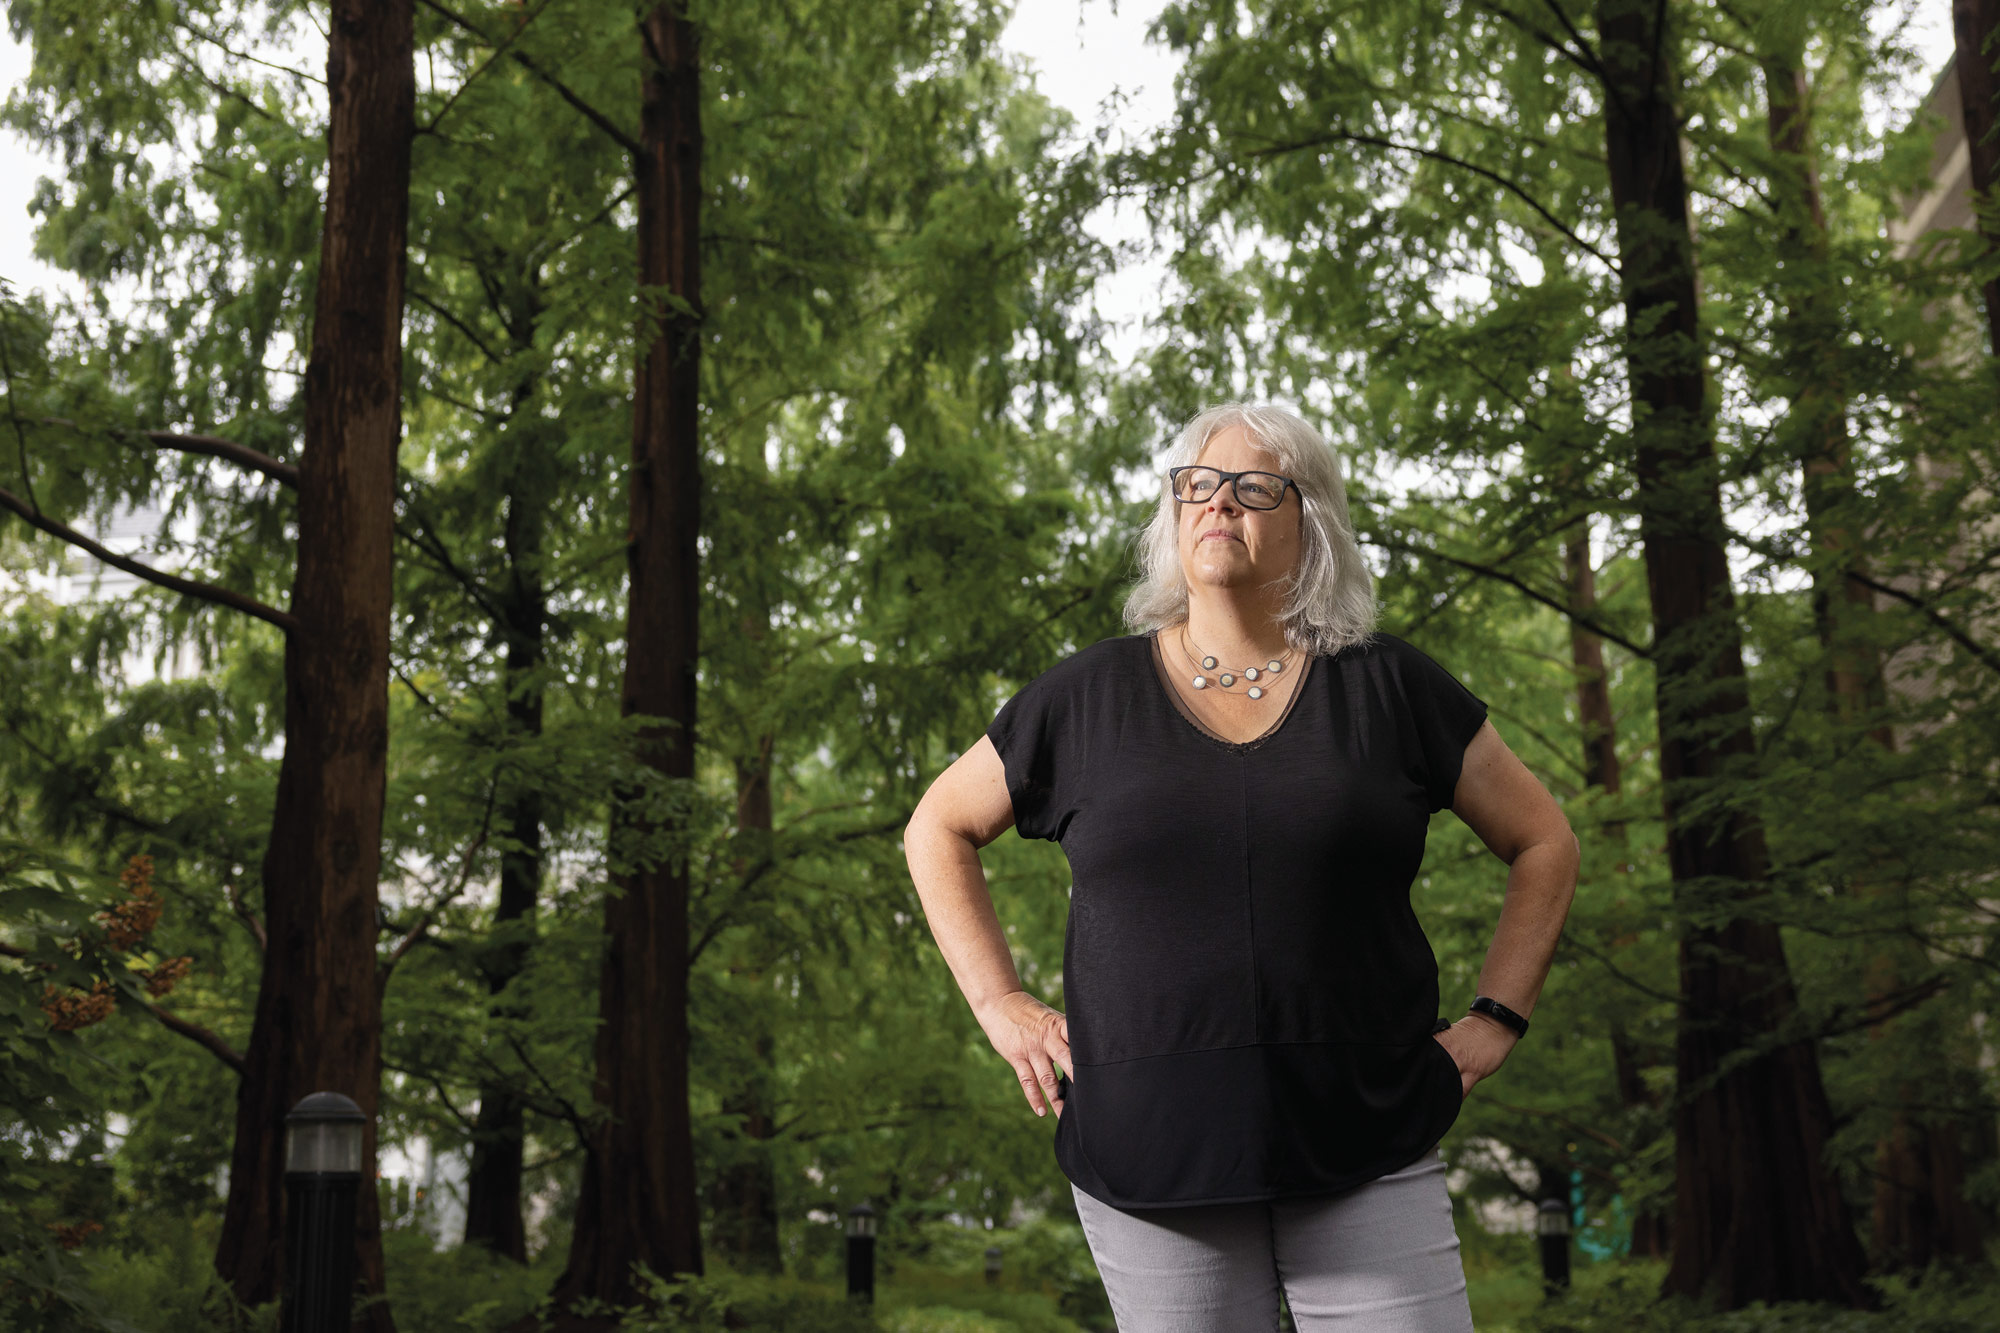 Sunka Simon stands in front of leafy, green trees, looking up and wearing a black t-shirt.